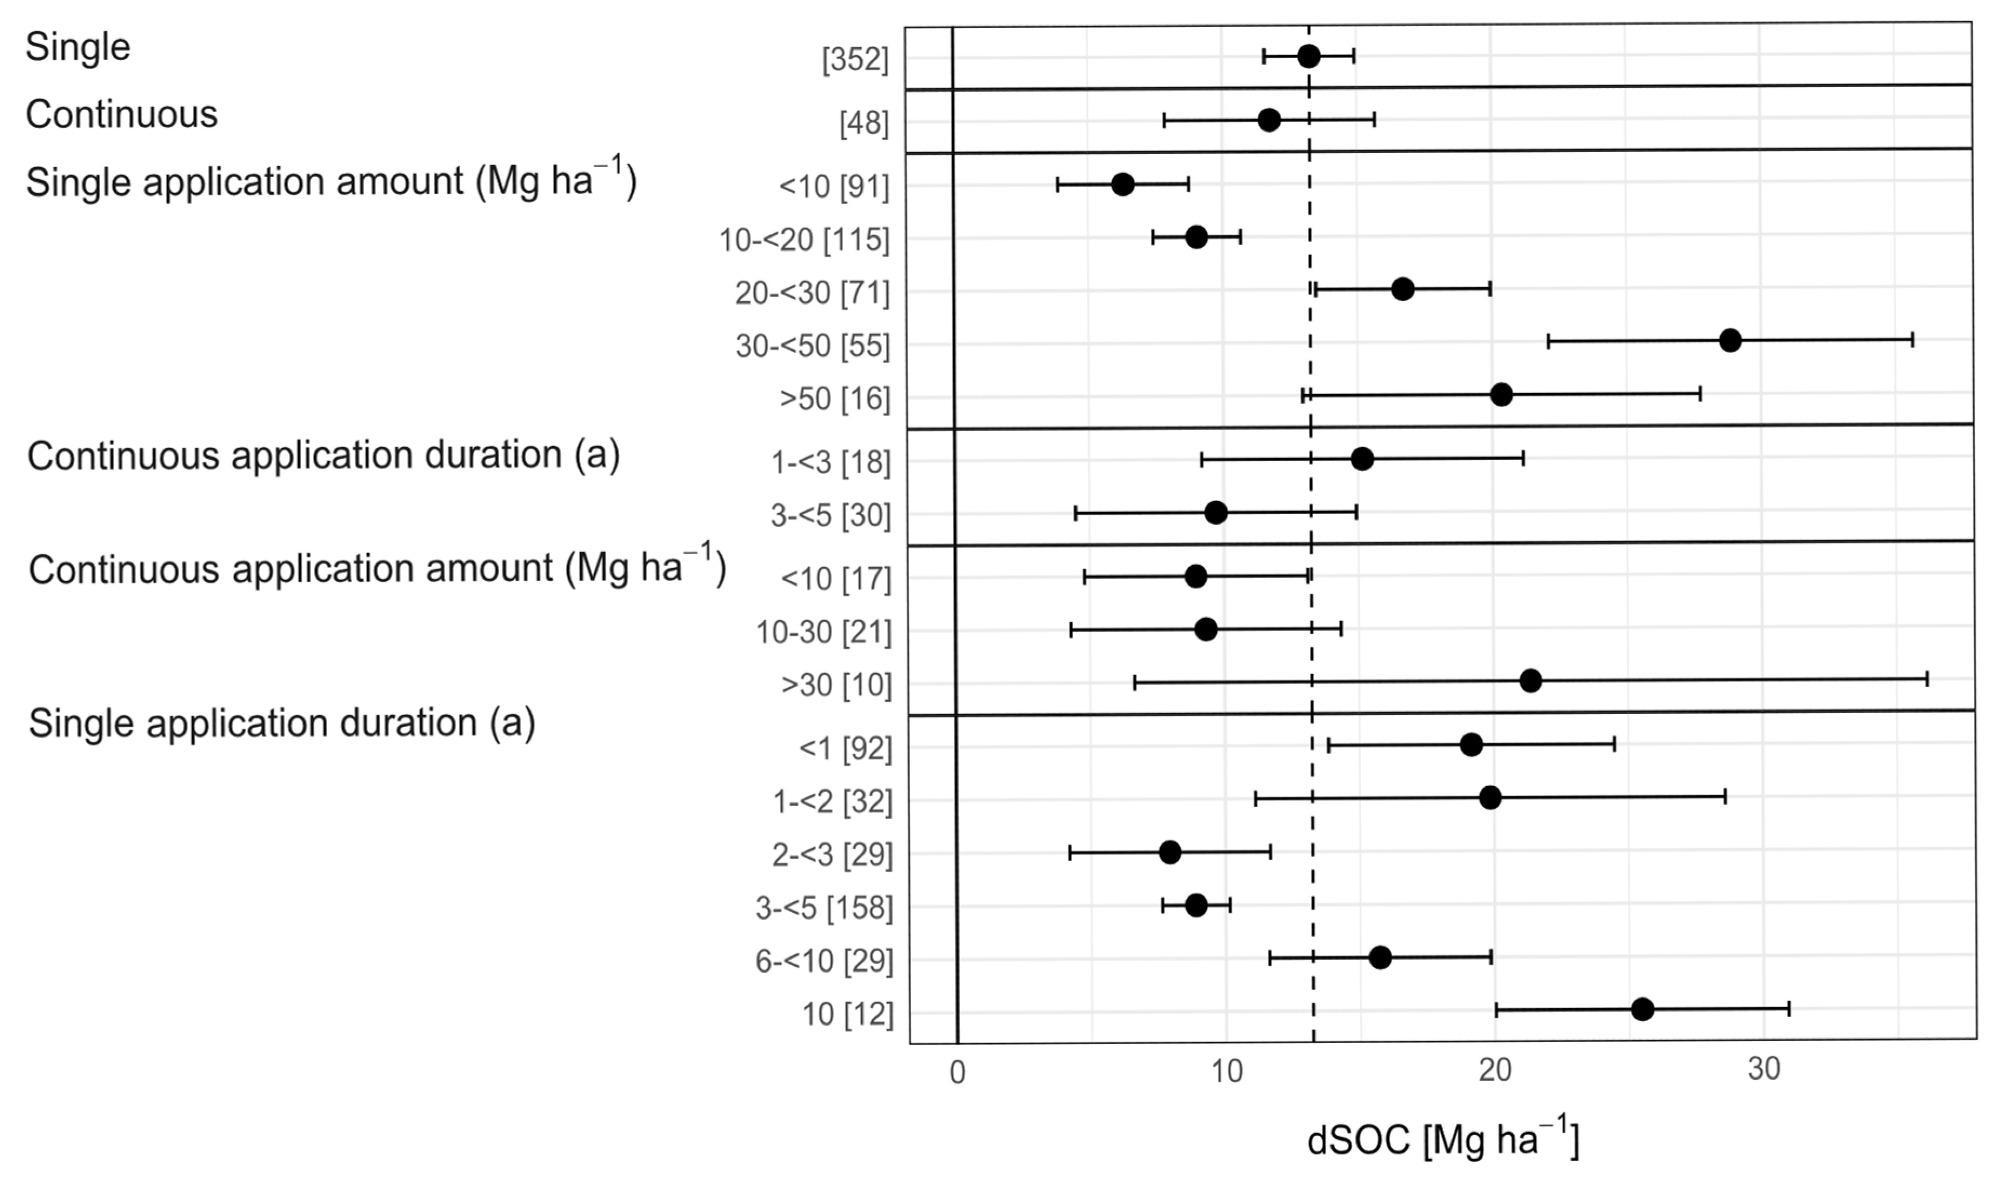 Meta-analysis results of the “field dataset”, given as a forest plot. Presented is the absolute mean difference of soil organic carbon stocks (dSOC) after the application of biochar influenced by whether the application was conducted once (single application) or repeatedly (continuous application). Points within the range represent the mean dSOC and the line within the 95% confidence interval represents the range of the effect size. If the effect size range crosses the “zero-effect-line”, given as a solid vertical line at 0%, the result can be interpreted as statistically insignificant. The effect sizes of each group were considered to be significantly different at p < 0.05 from each other if the 95% confidence intervals were not-overlapping. A vertical black dotted line represents the grand overall mean.